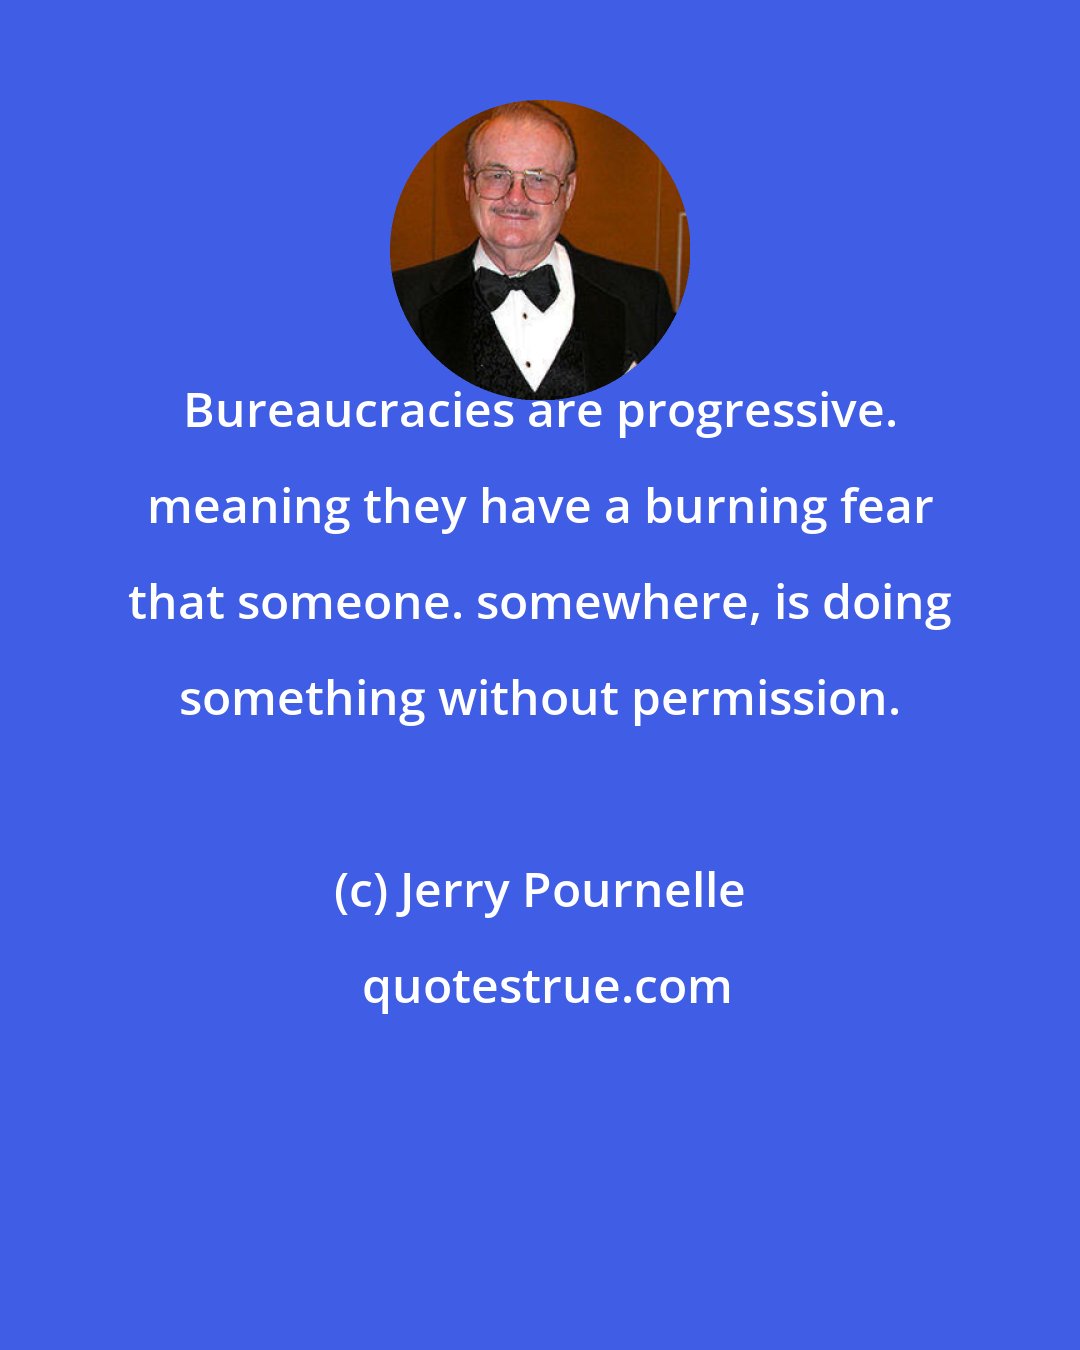 Jerry Pournelle: Bureaucracies are progressive. meaning they have a burning fear that someone. somewhere, is doing something without permission.